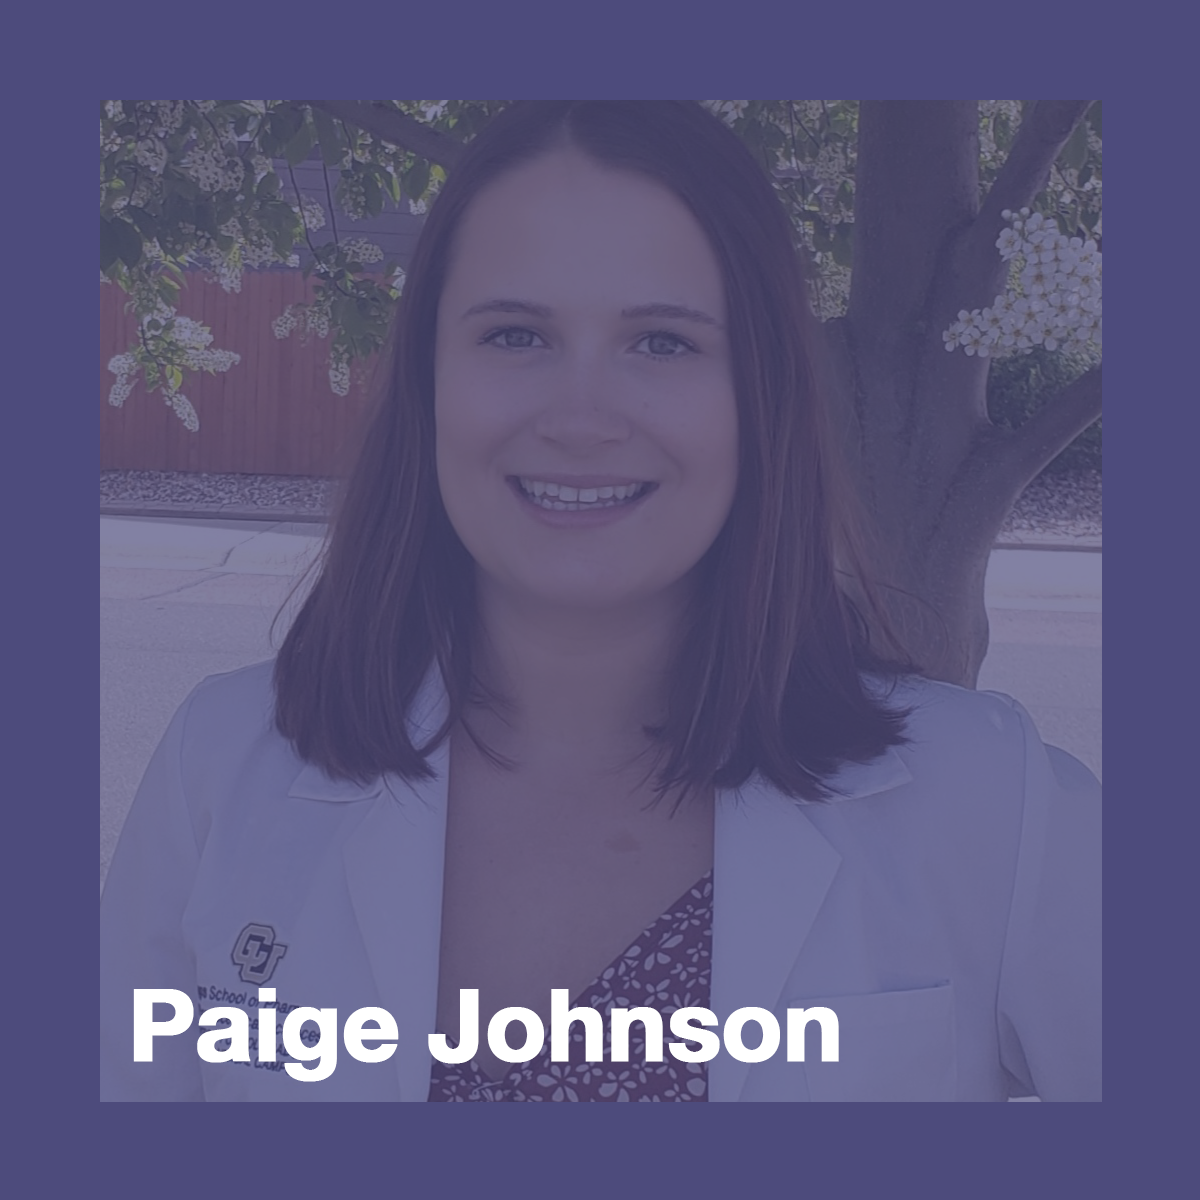 Paige Johnson, pharmacy scholar. She is smiling at the camera. She is wearing a white pharmacy coat over a maroon shirt and standing in front of a small tree and a street.